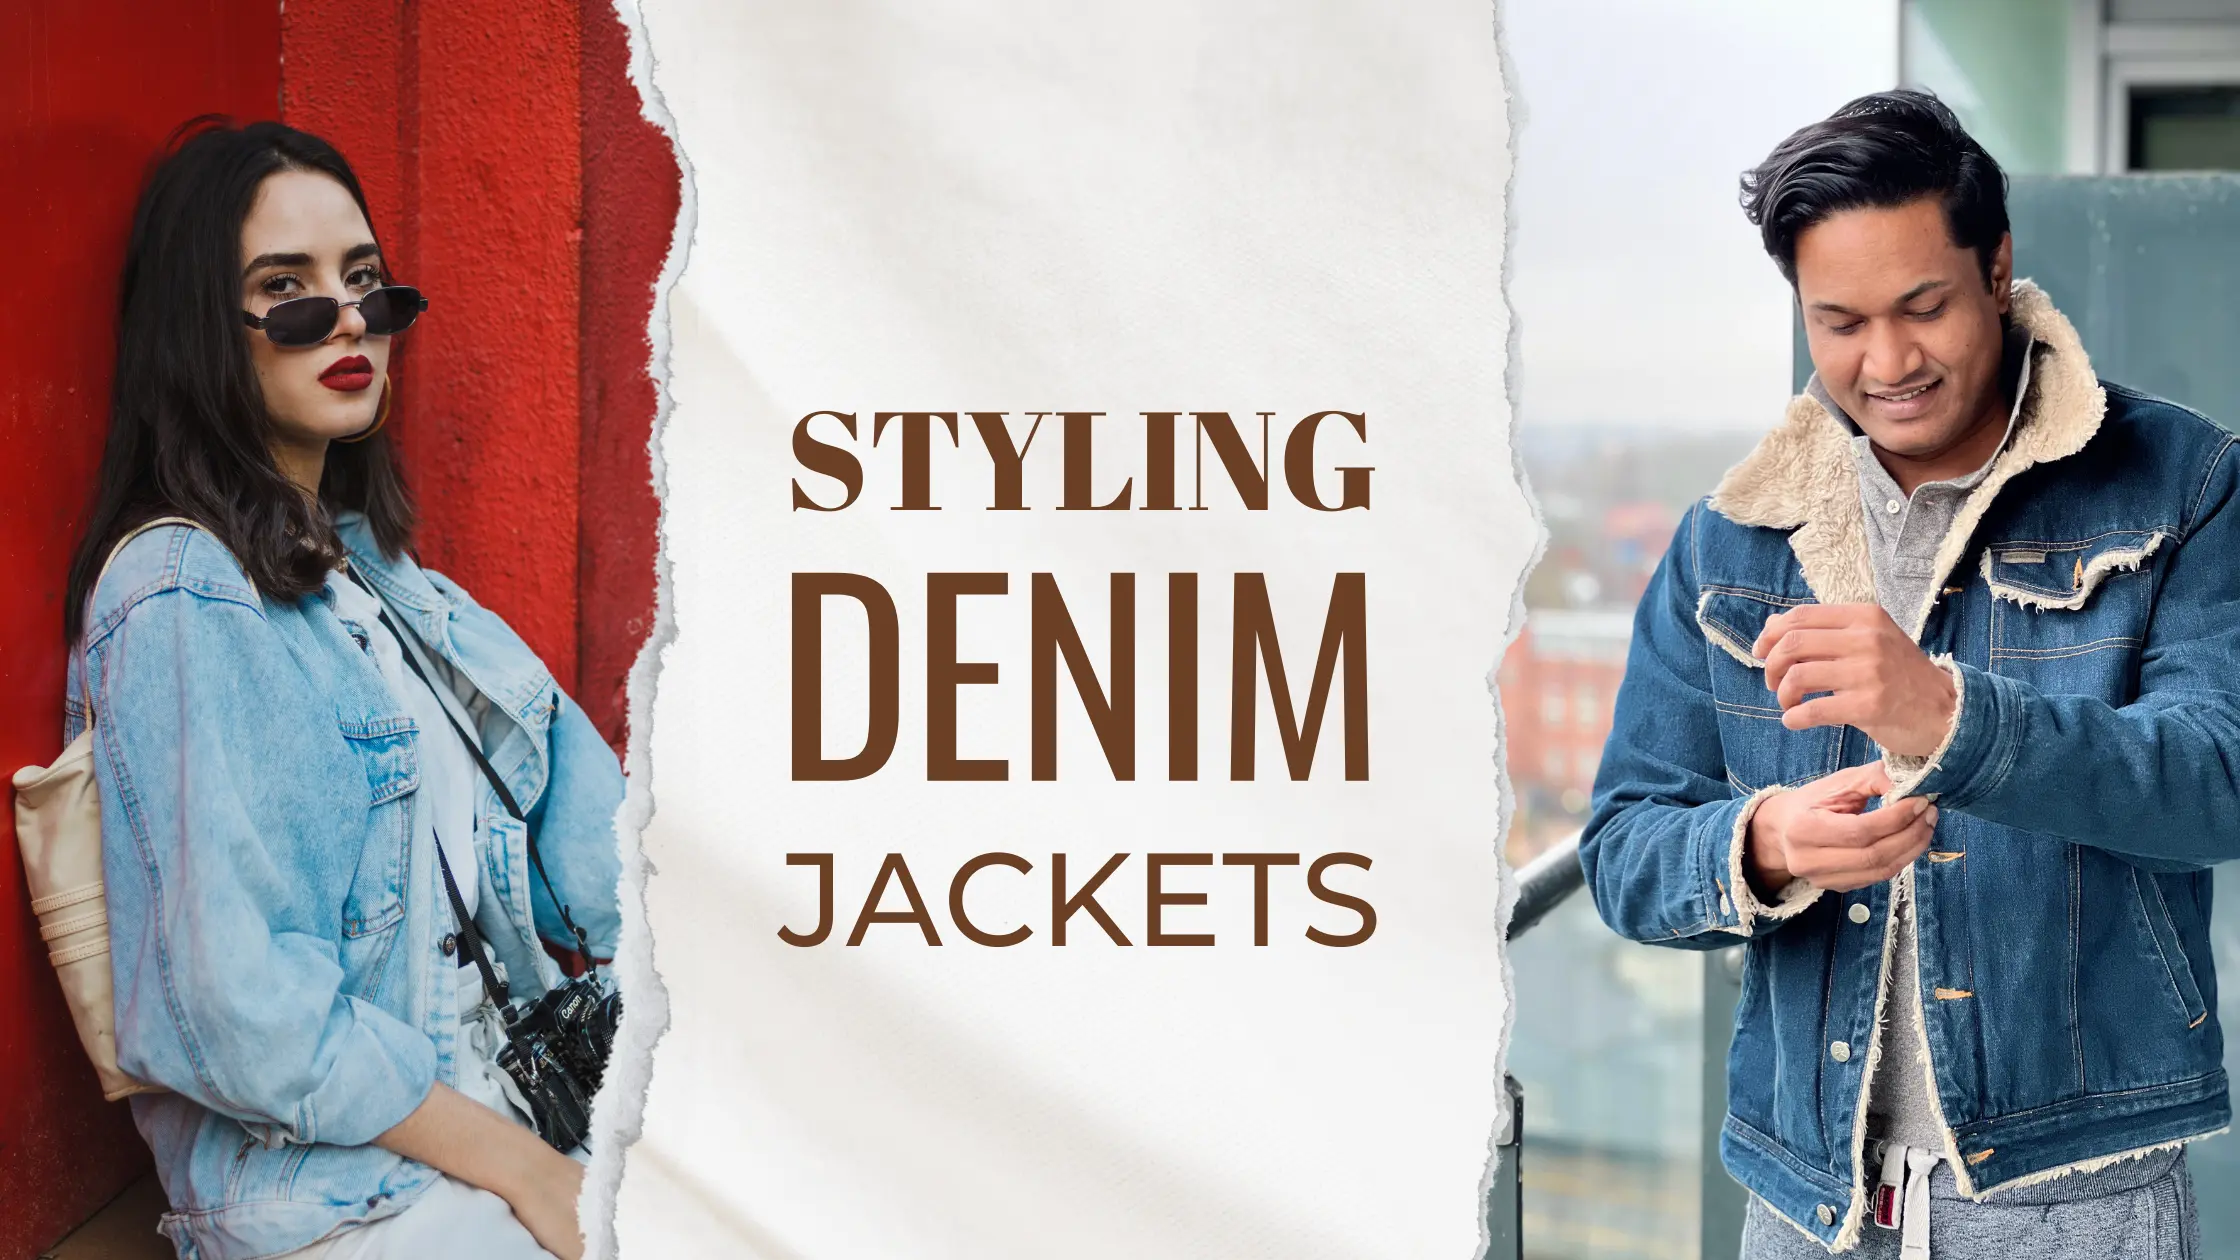 Styling Denim Jackets for Any Occasion